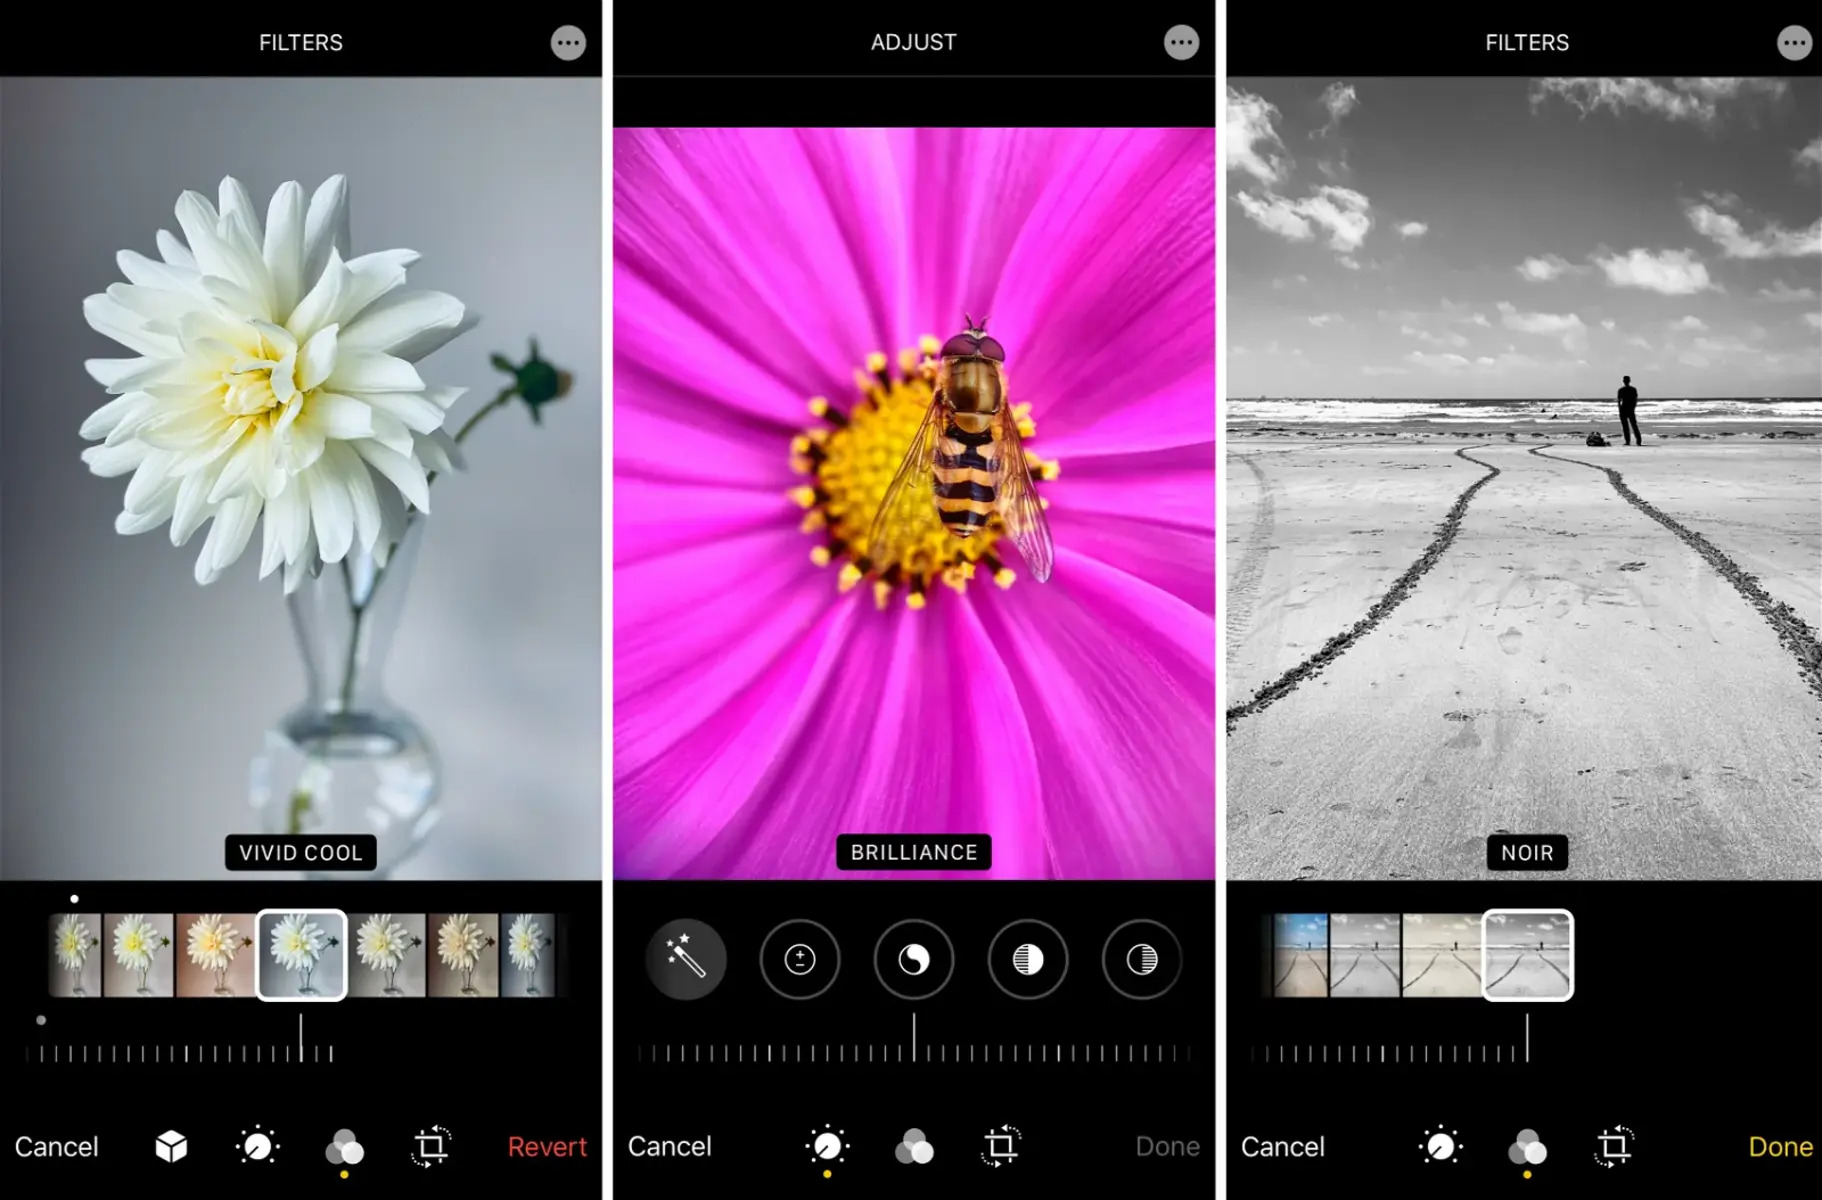 How To Use The Live Photo Editor On IPhone